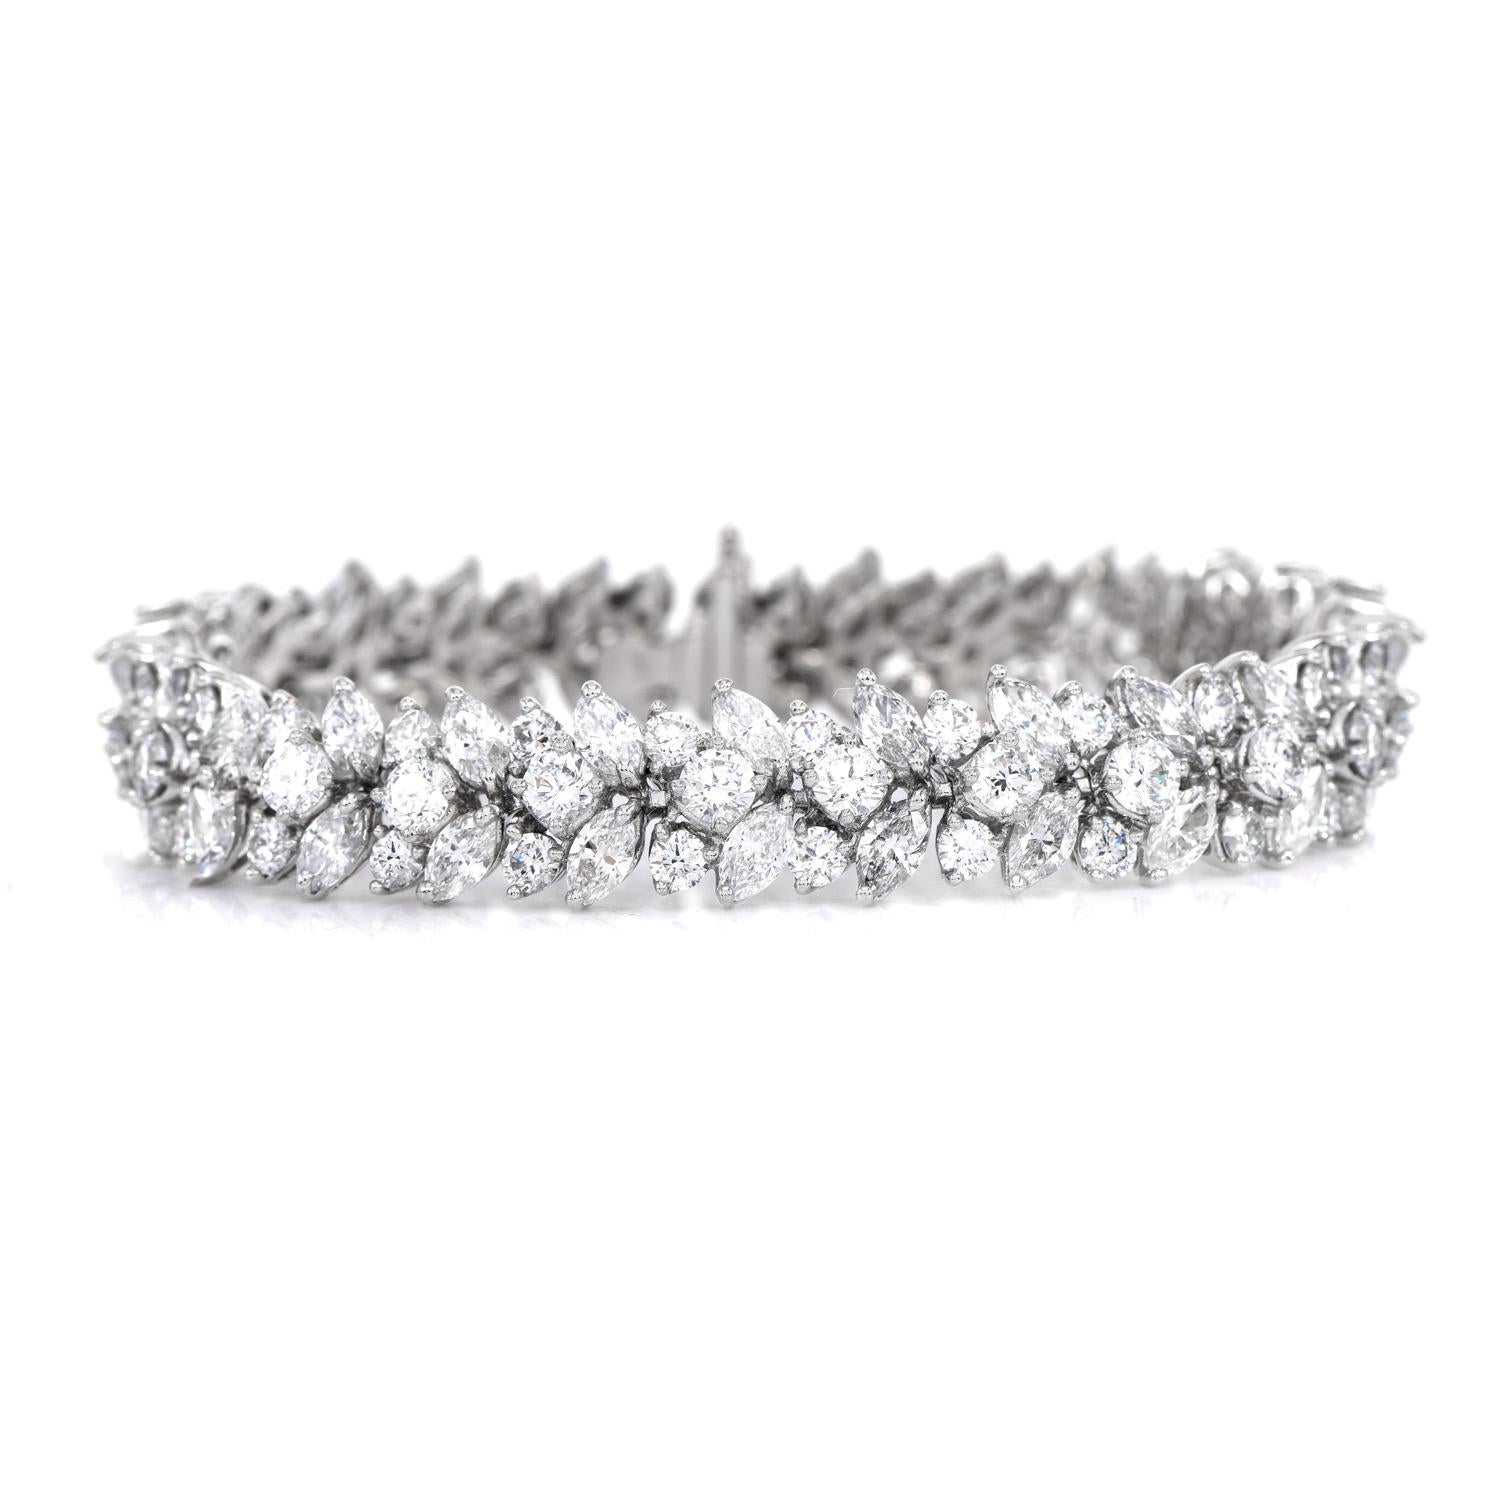 Fire, Sparkle, and Brilliance all radiate from this Marquise Diamond Floral-inspired Bracelet.

Crafted in Luxurious Platinum, this bracelet contains (52) ideally matched Marquise diamonds & (81) Round Cut 

prong Set, natural Diamonds,

Total